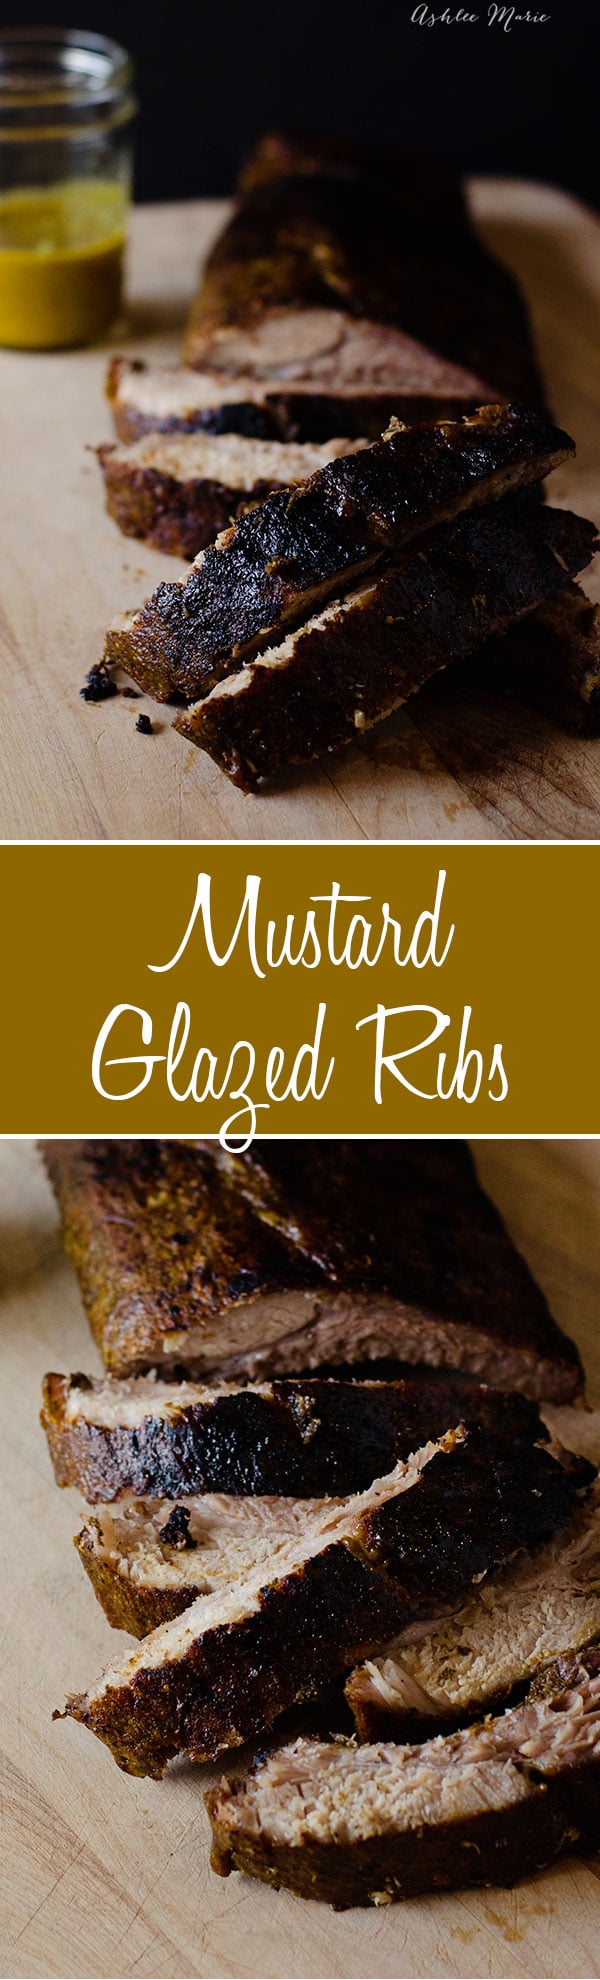 I love ribs in all forms, from ooey gooey to more flavorful, these mustard glazed pork ribs are one of my all time favorites, cook it low and slow, glazing and you will love the results